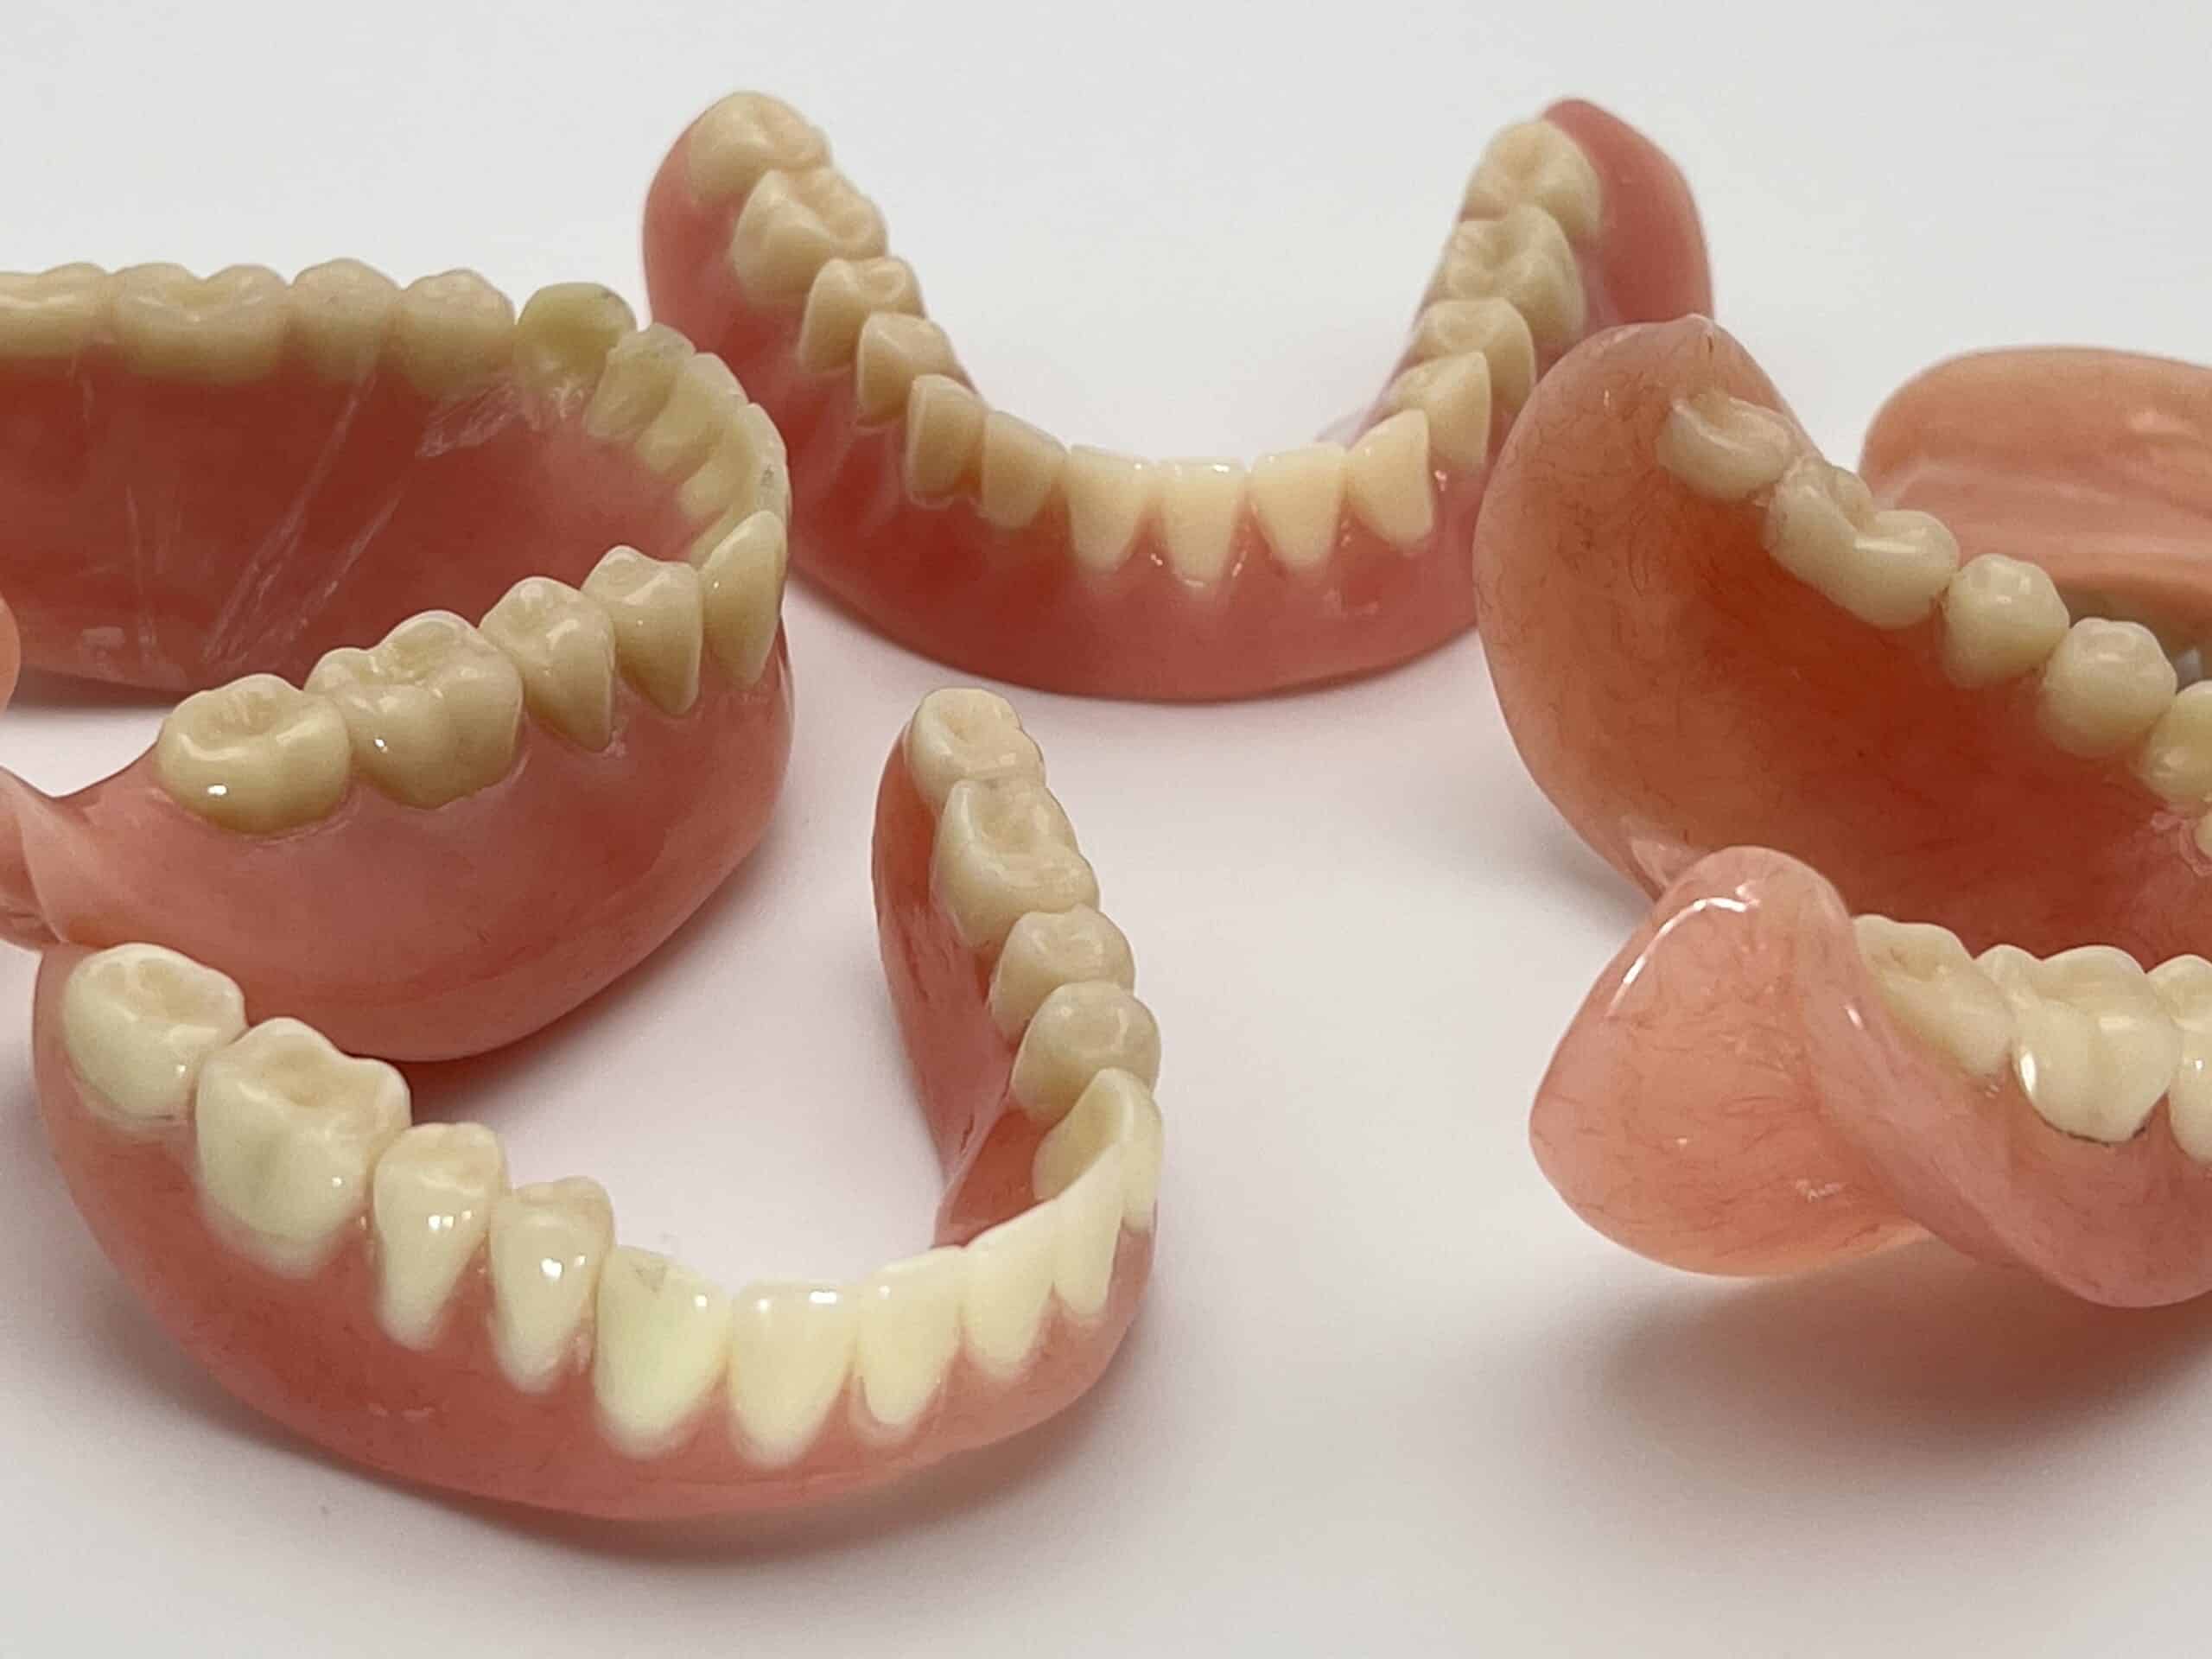 Denture Buying Guide The Essentials To Know